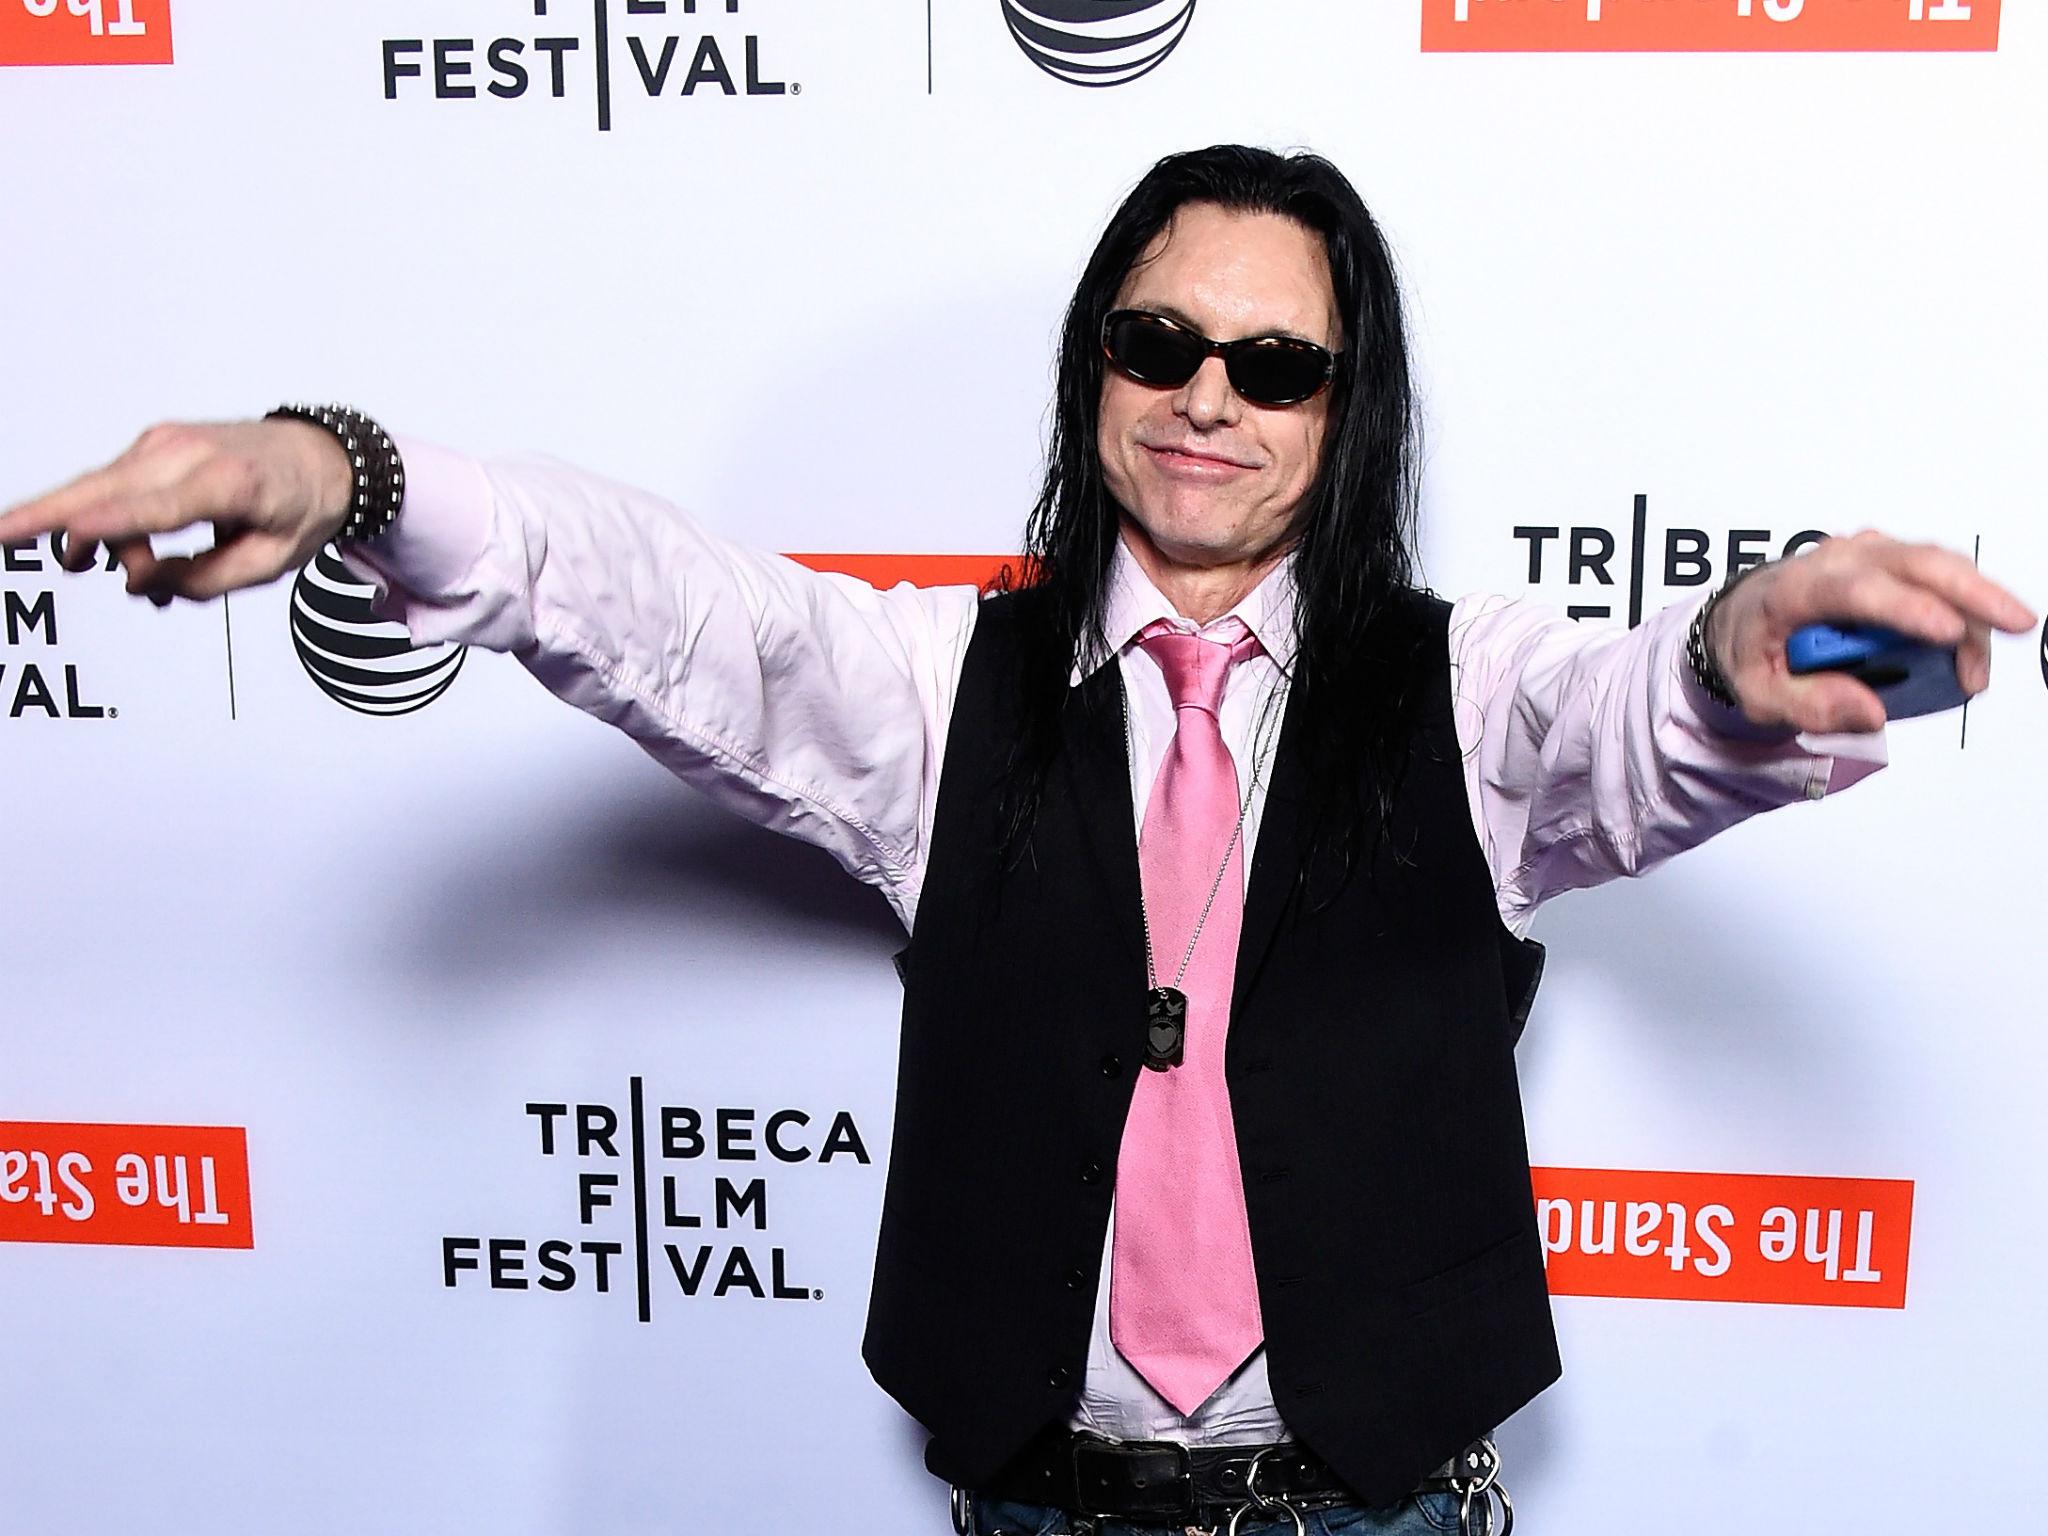 The Room director Tommy Wiseau